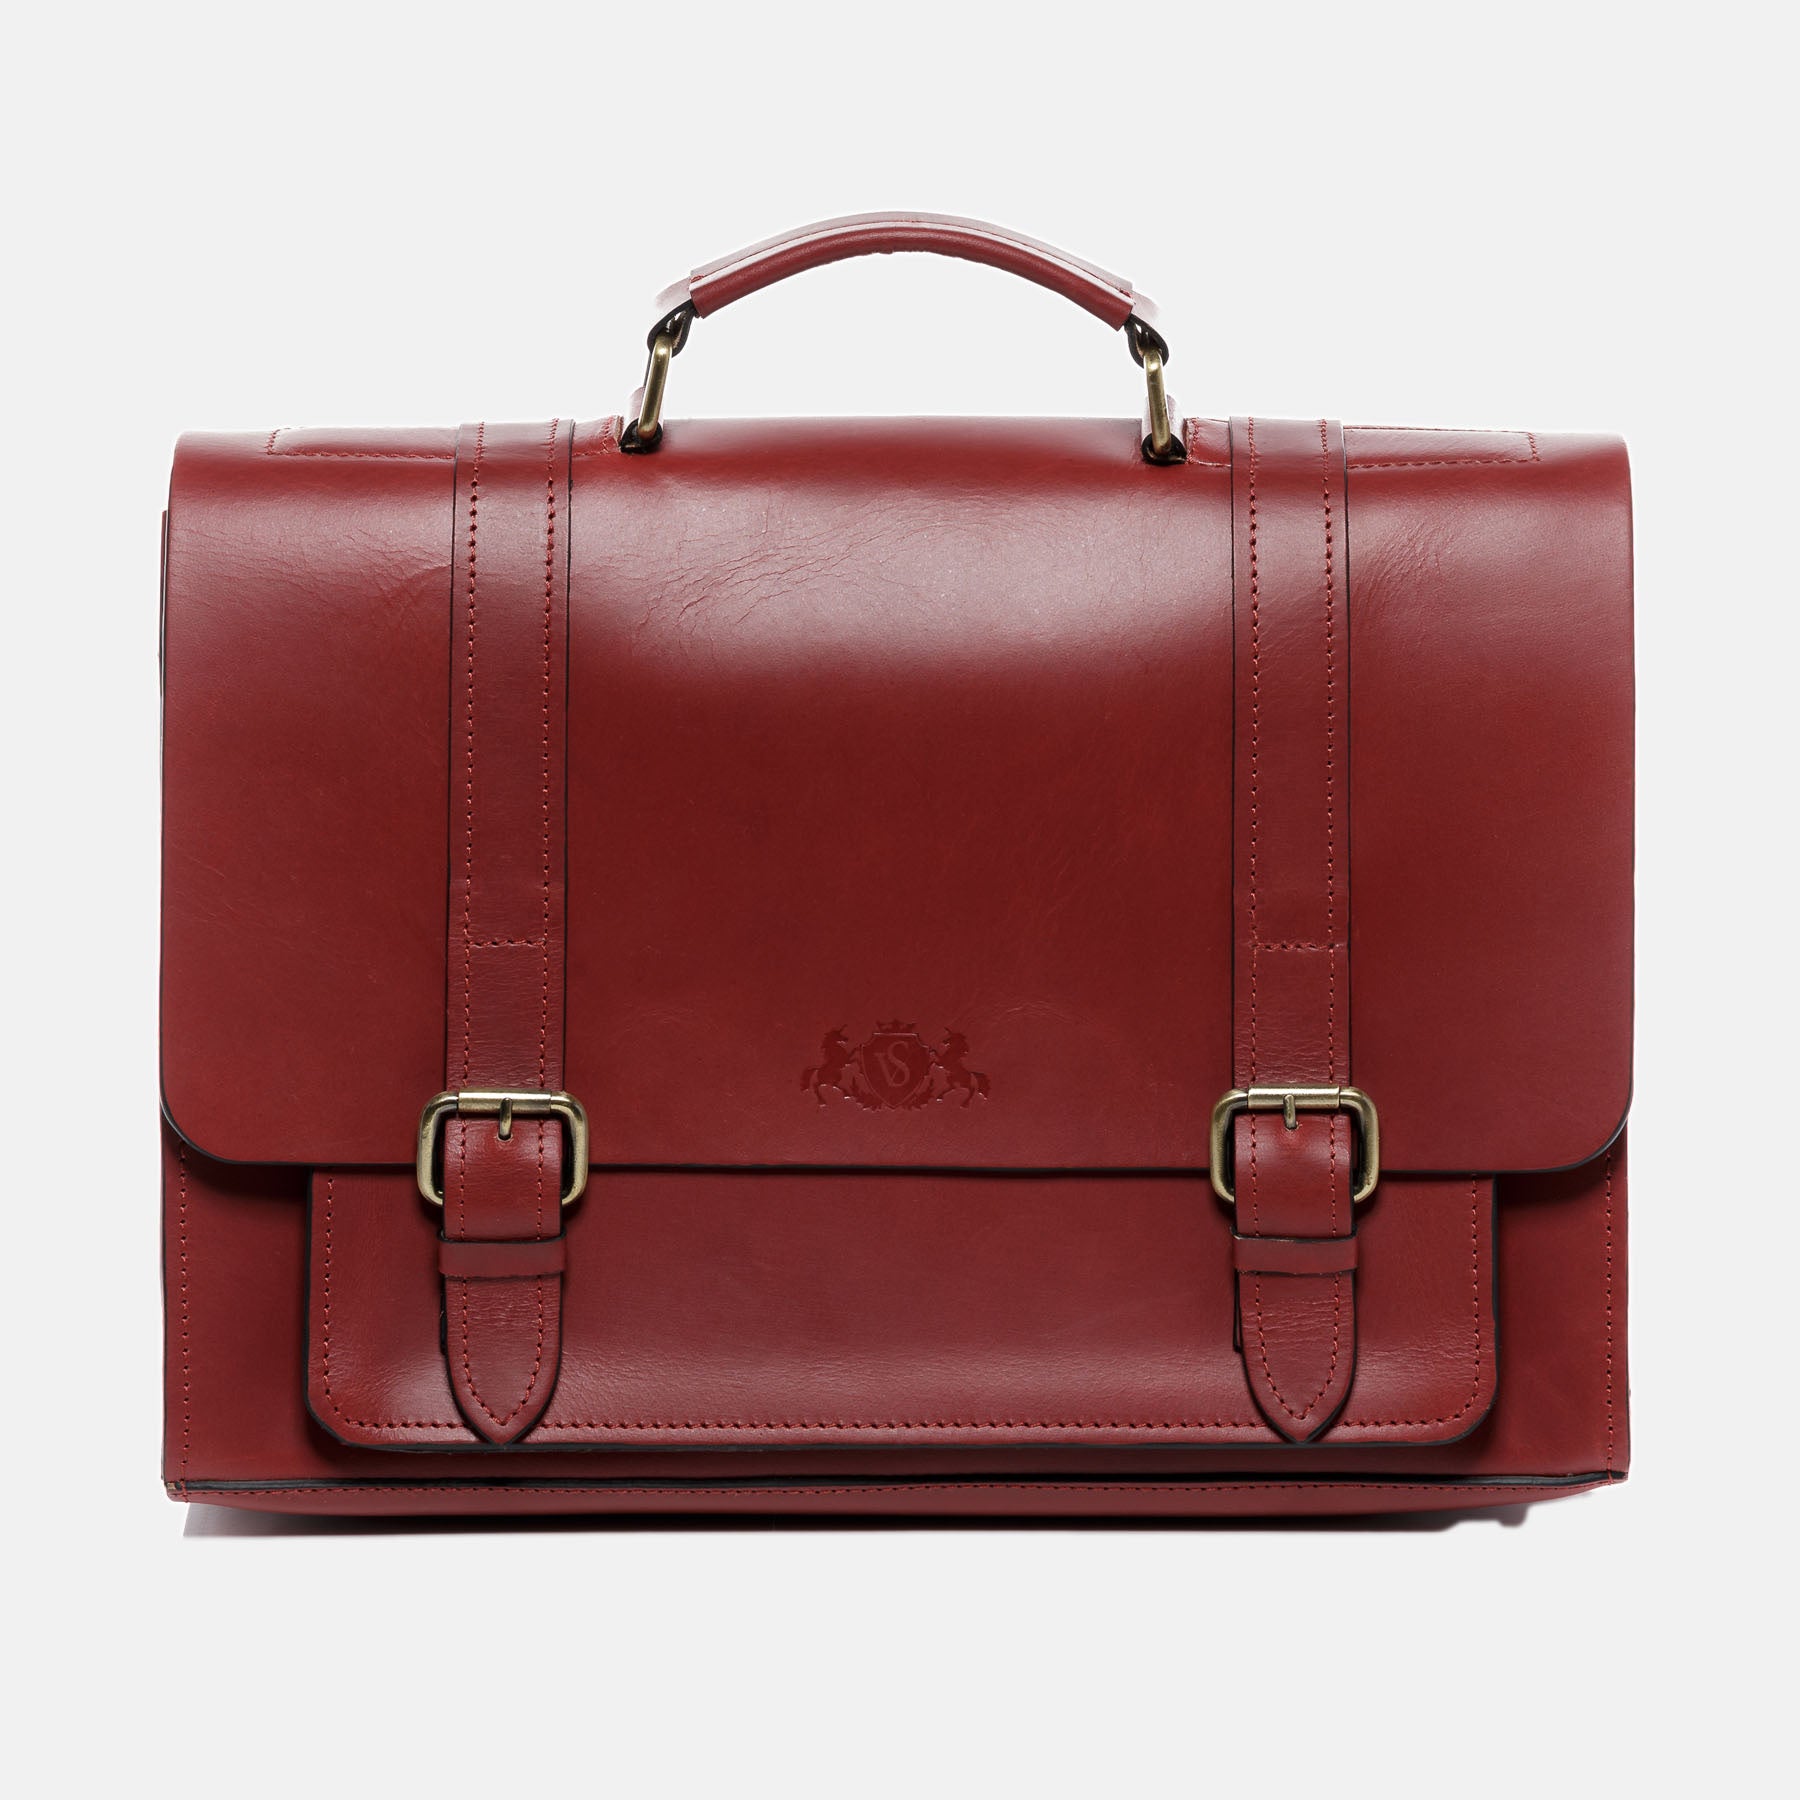 Briefcase BRISTOL saddle leather red